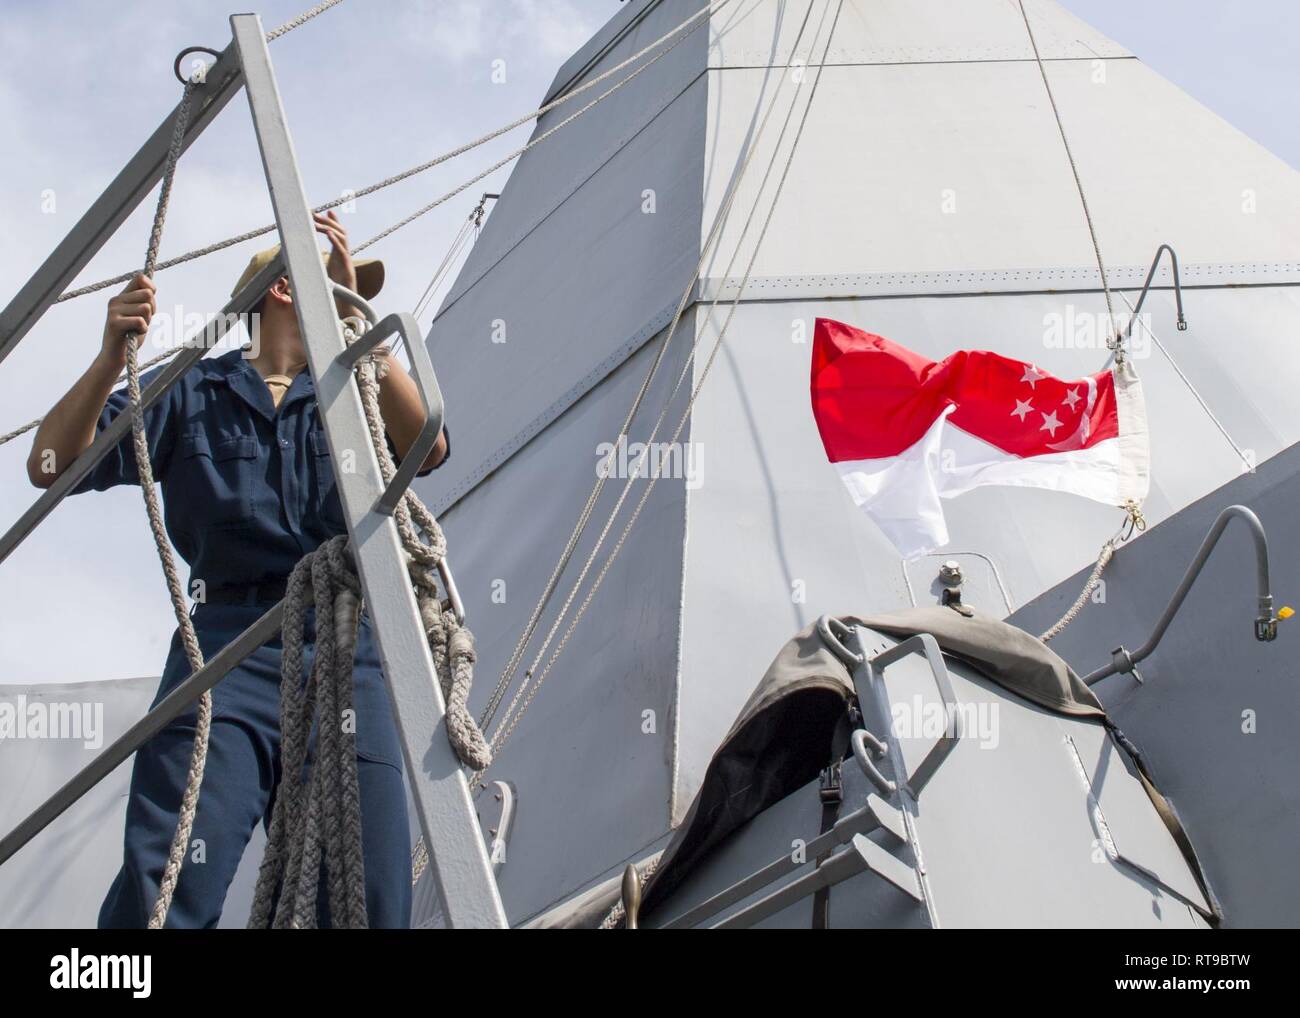 SINGAPORE (Jan. 26, 2019) Quartermaster Seaman Cesar Vallejauregui, from San Diego, raises the Singapore national flag aboard the San Antonio-class amphibious transport dock ship USS Anchorage (LPD 23) during a port visit to Singapore while on a deployment of the Essex Amphibious Ready Group (ARG) and 13th Marine Expeditionary Unit (MEU). The Essex ARG/ 13th MEU is a capable and lethal Navy-Marine Corps team deployed to the 7th fleet area of operations to support regional stability, reassure partners and allies and maintain a presence postured to respond to any crisis ranging from humanitarian Stock Photo